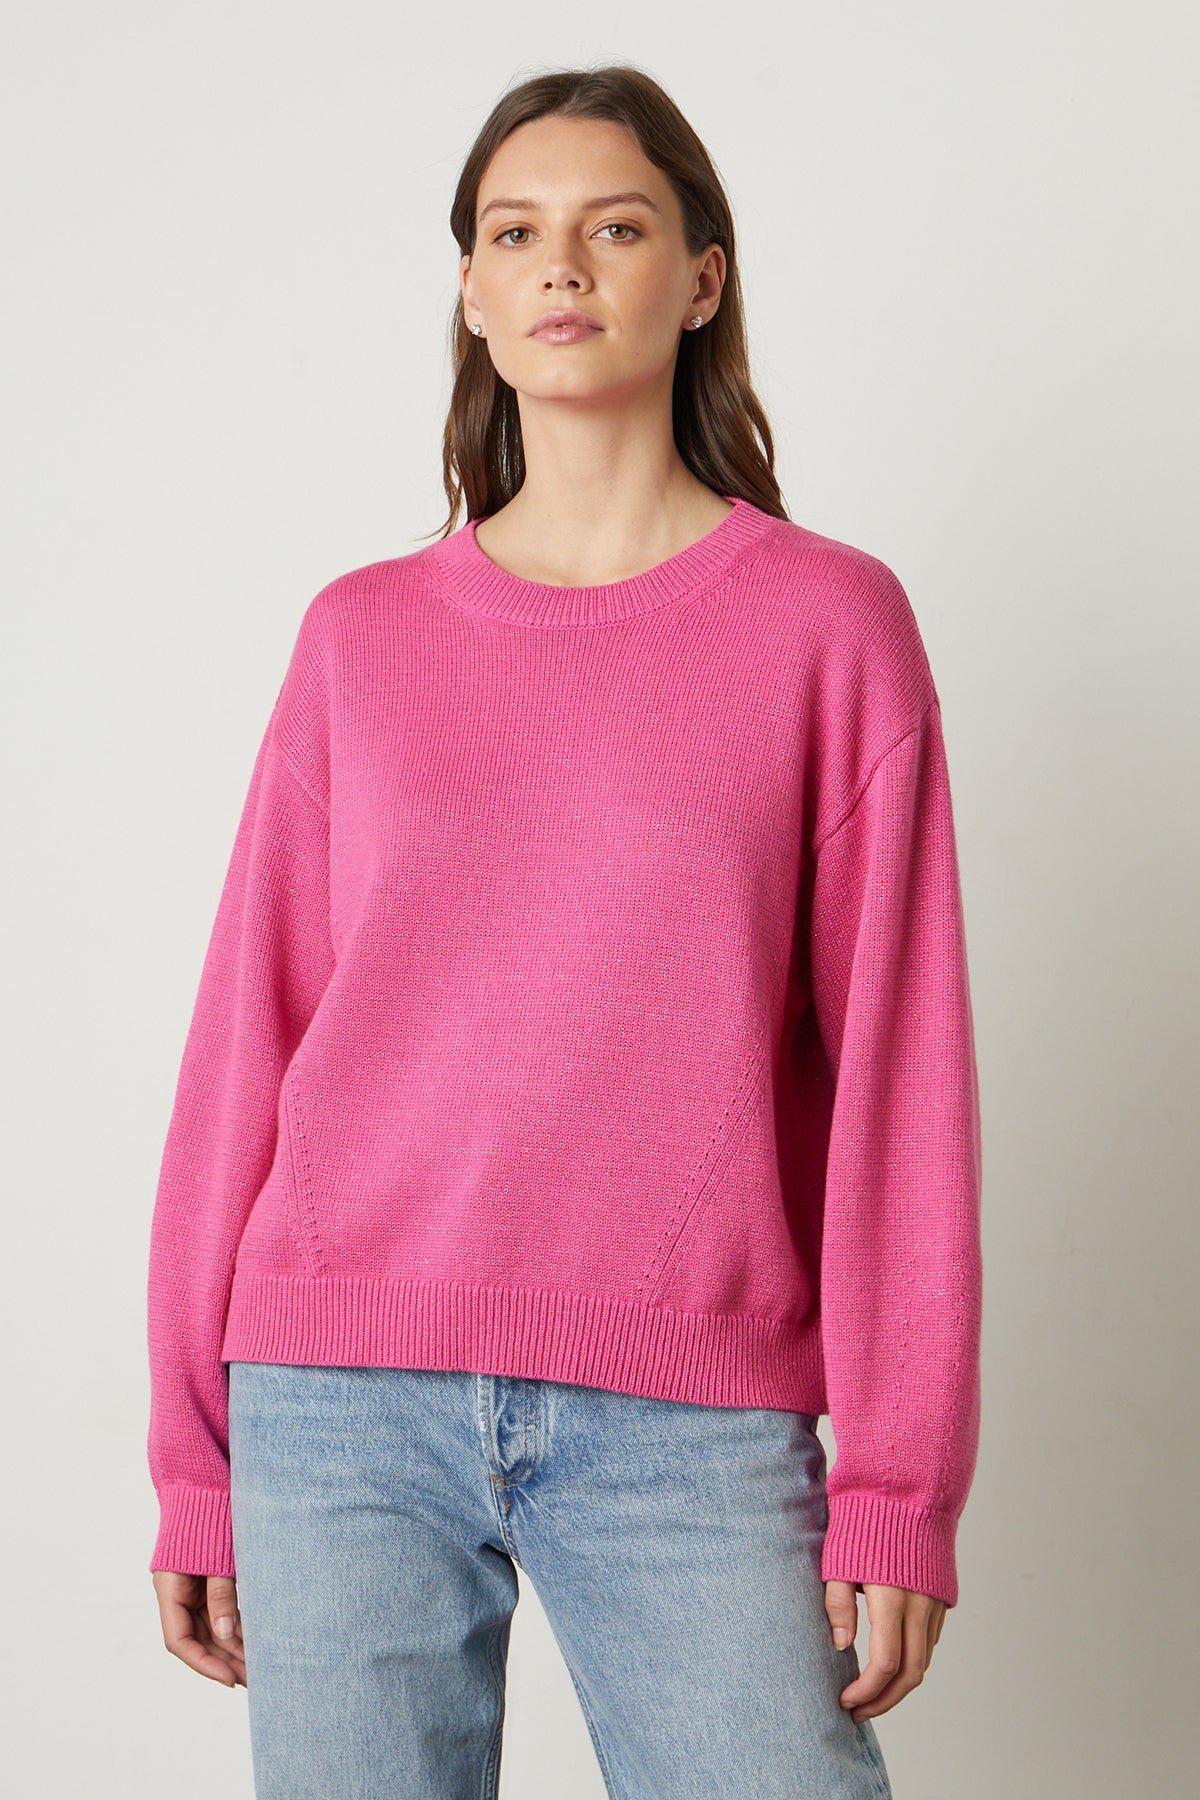 Hallie Crew Neck Sweater in bright candy pink with blue denim front-25751049994433